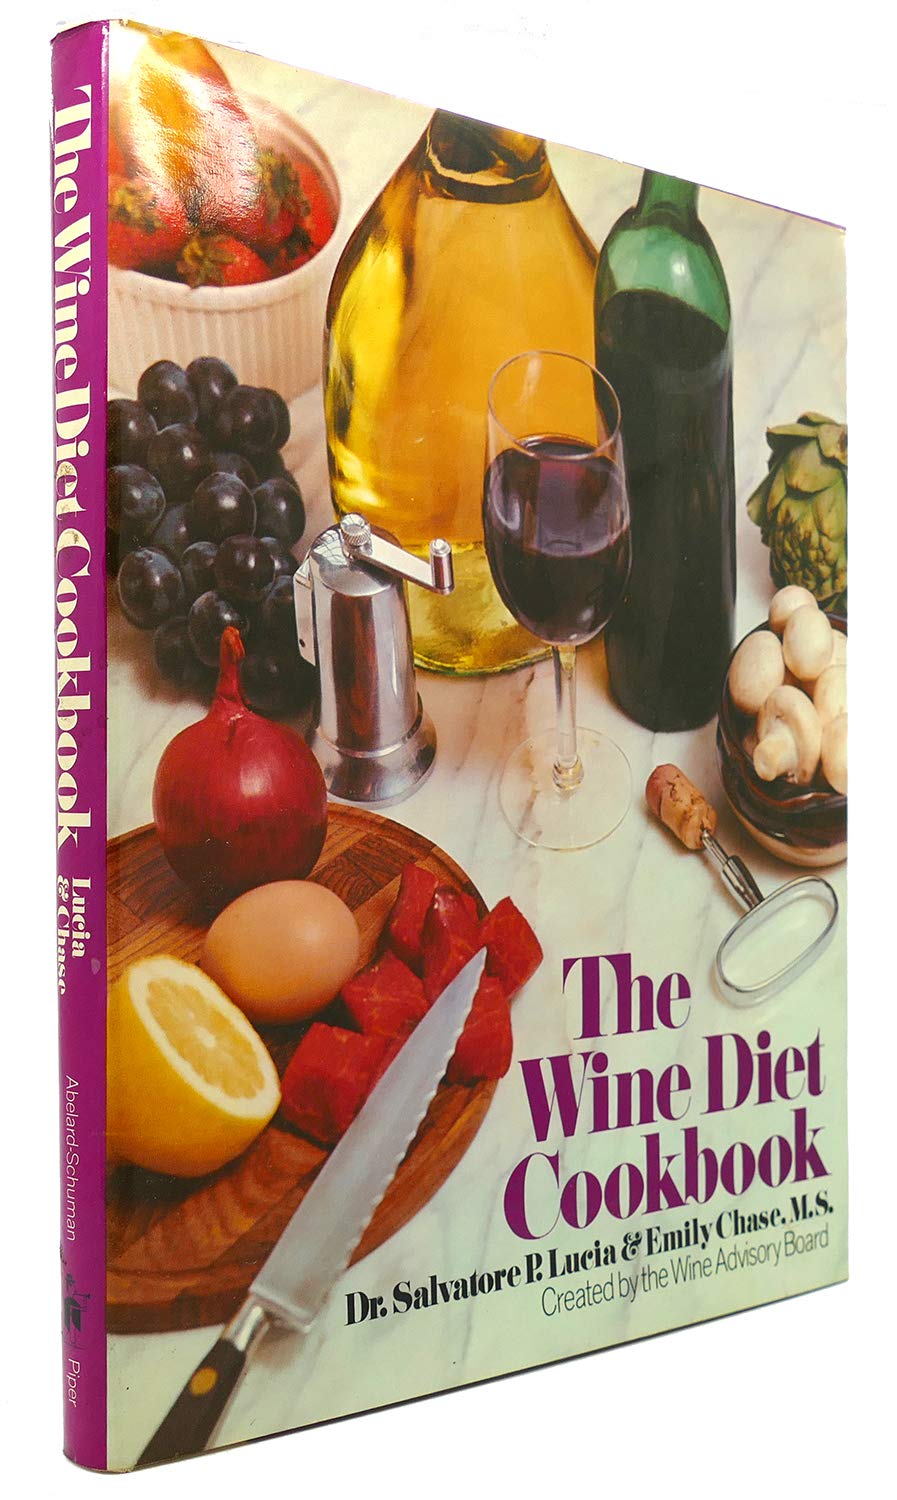 The Wine Diet Cookbook by Dr. Salvatore P Lucia